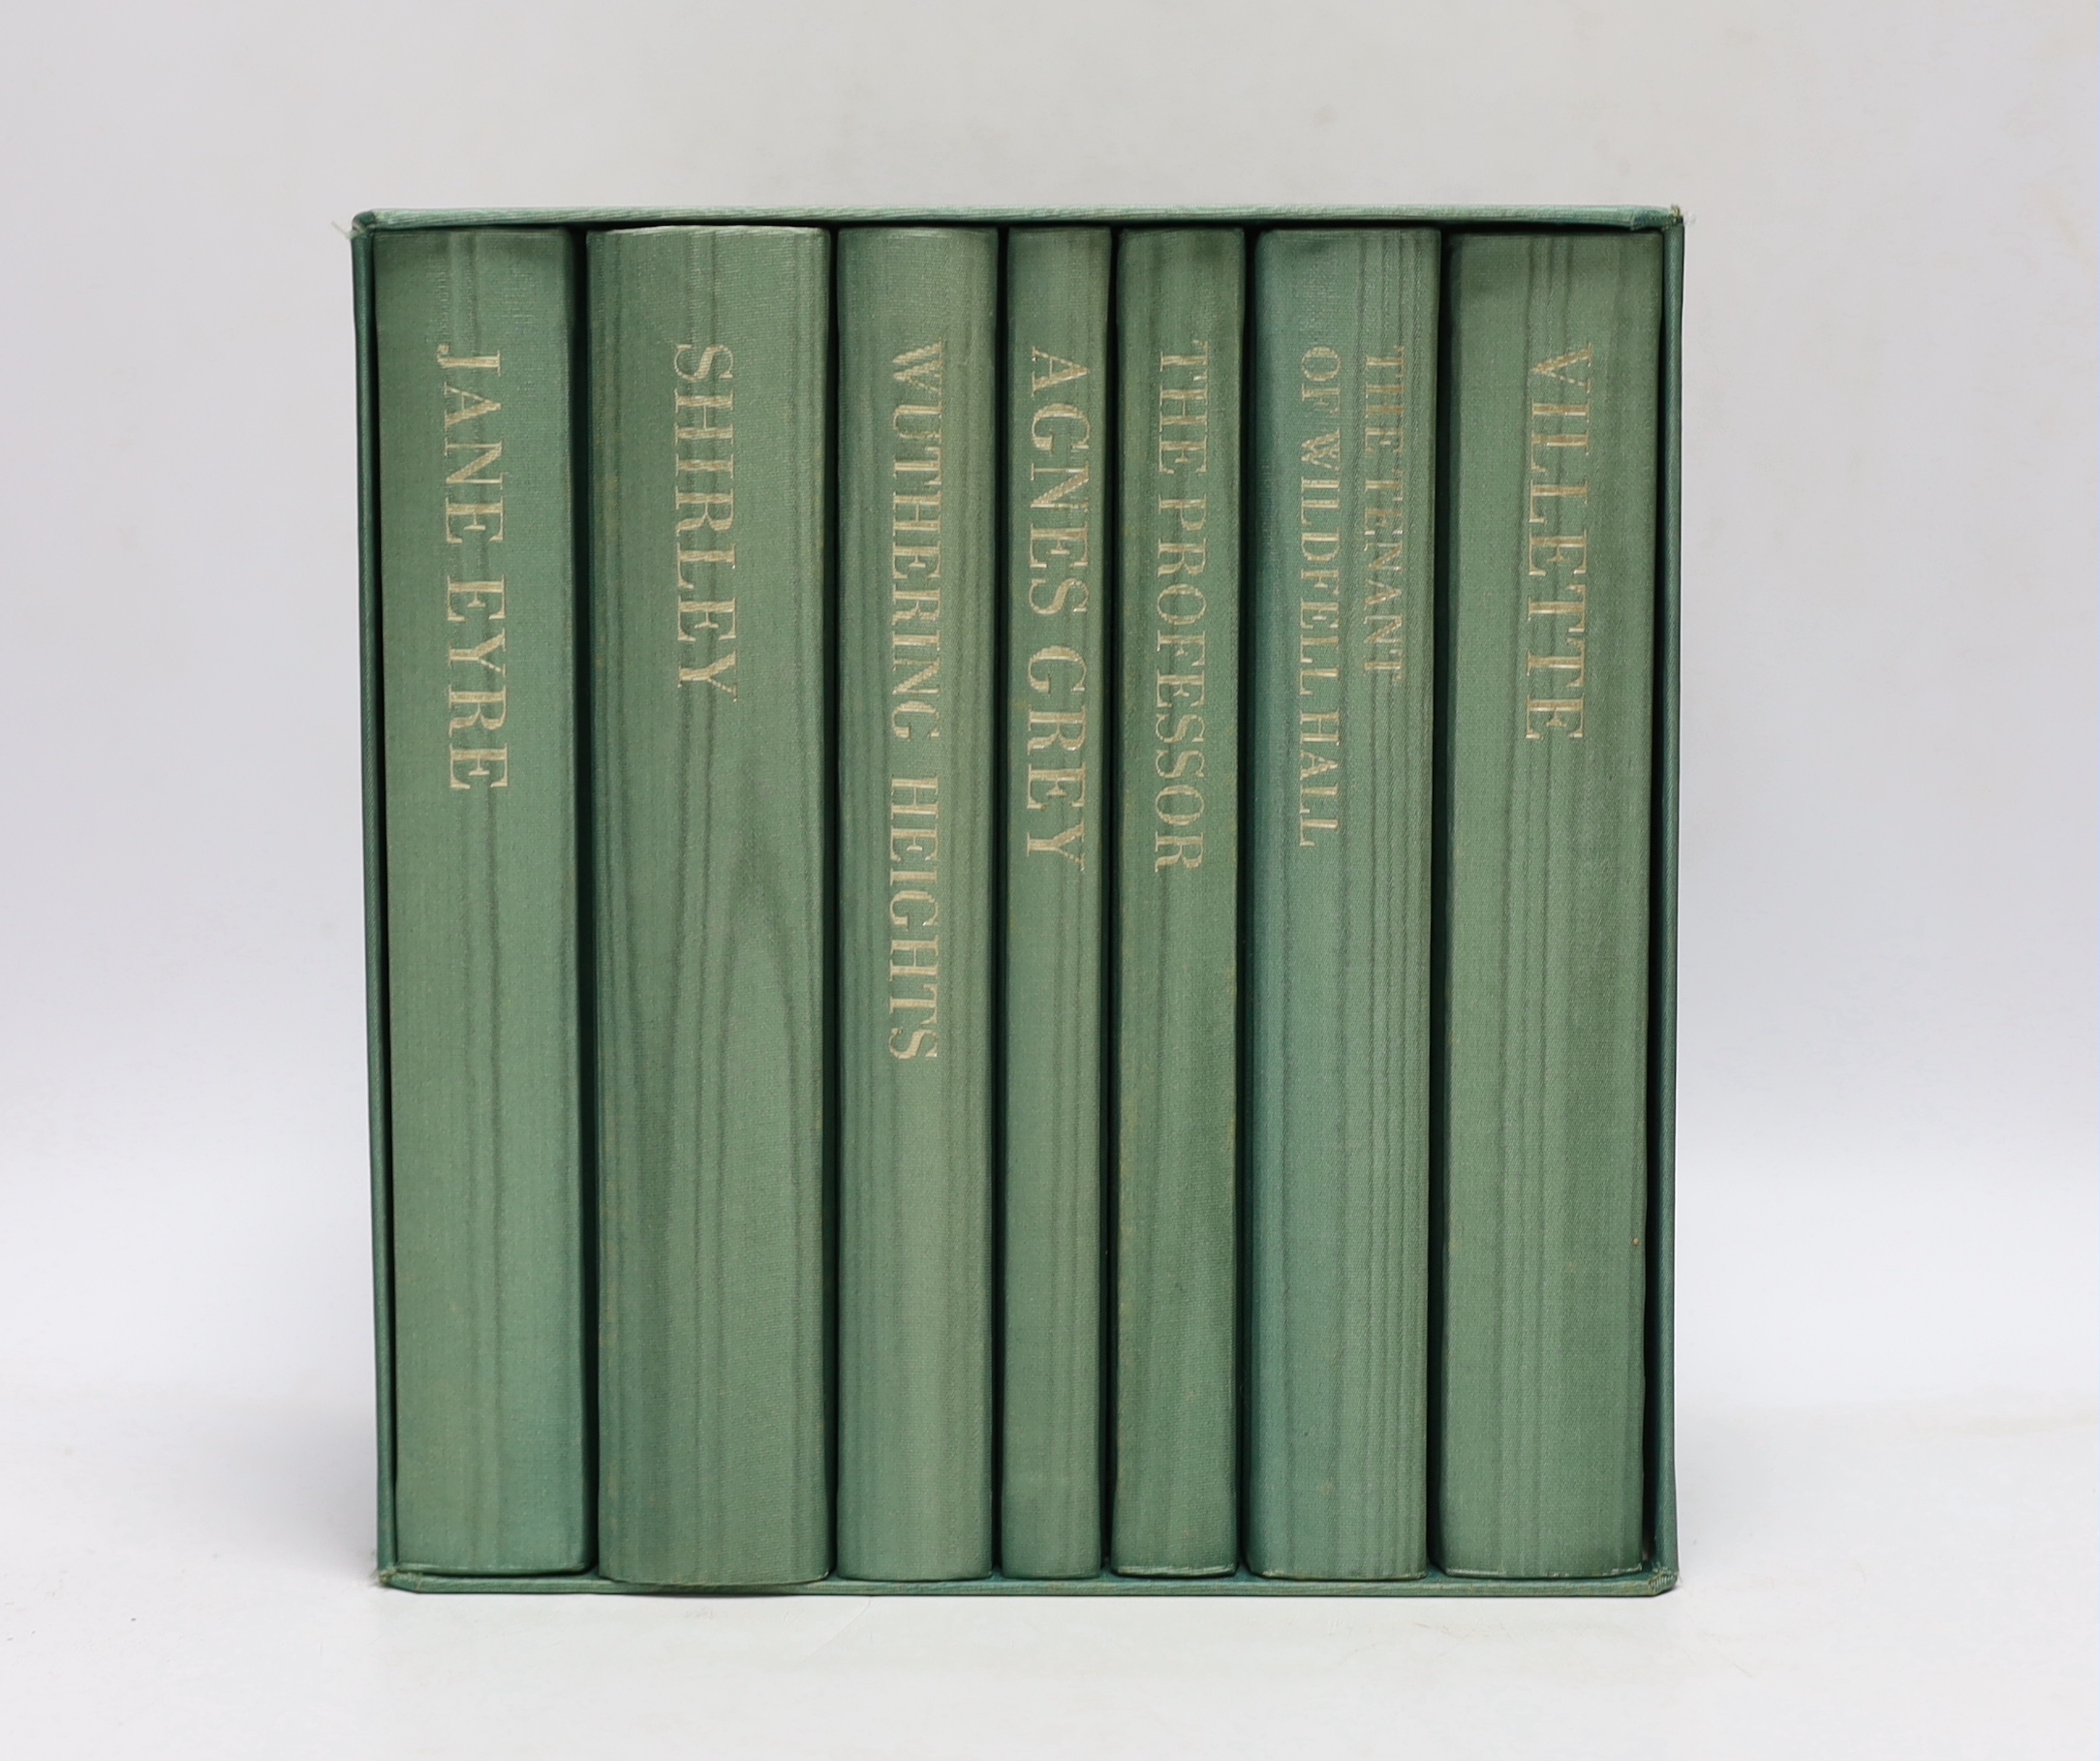 Folio Society - Bronte Sisters (The Complete Novels), 7 vols. frontispieces and other wood engraved illus. (by Simon Brett, Ian Stephens and others); gilt lettered green moiré cloth and matching slipcase. 1991; together